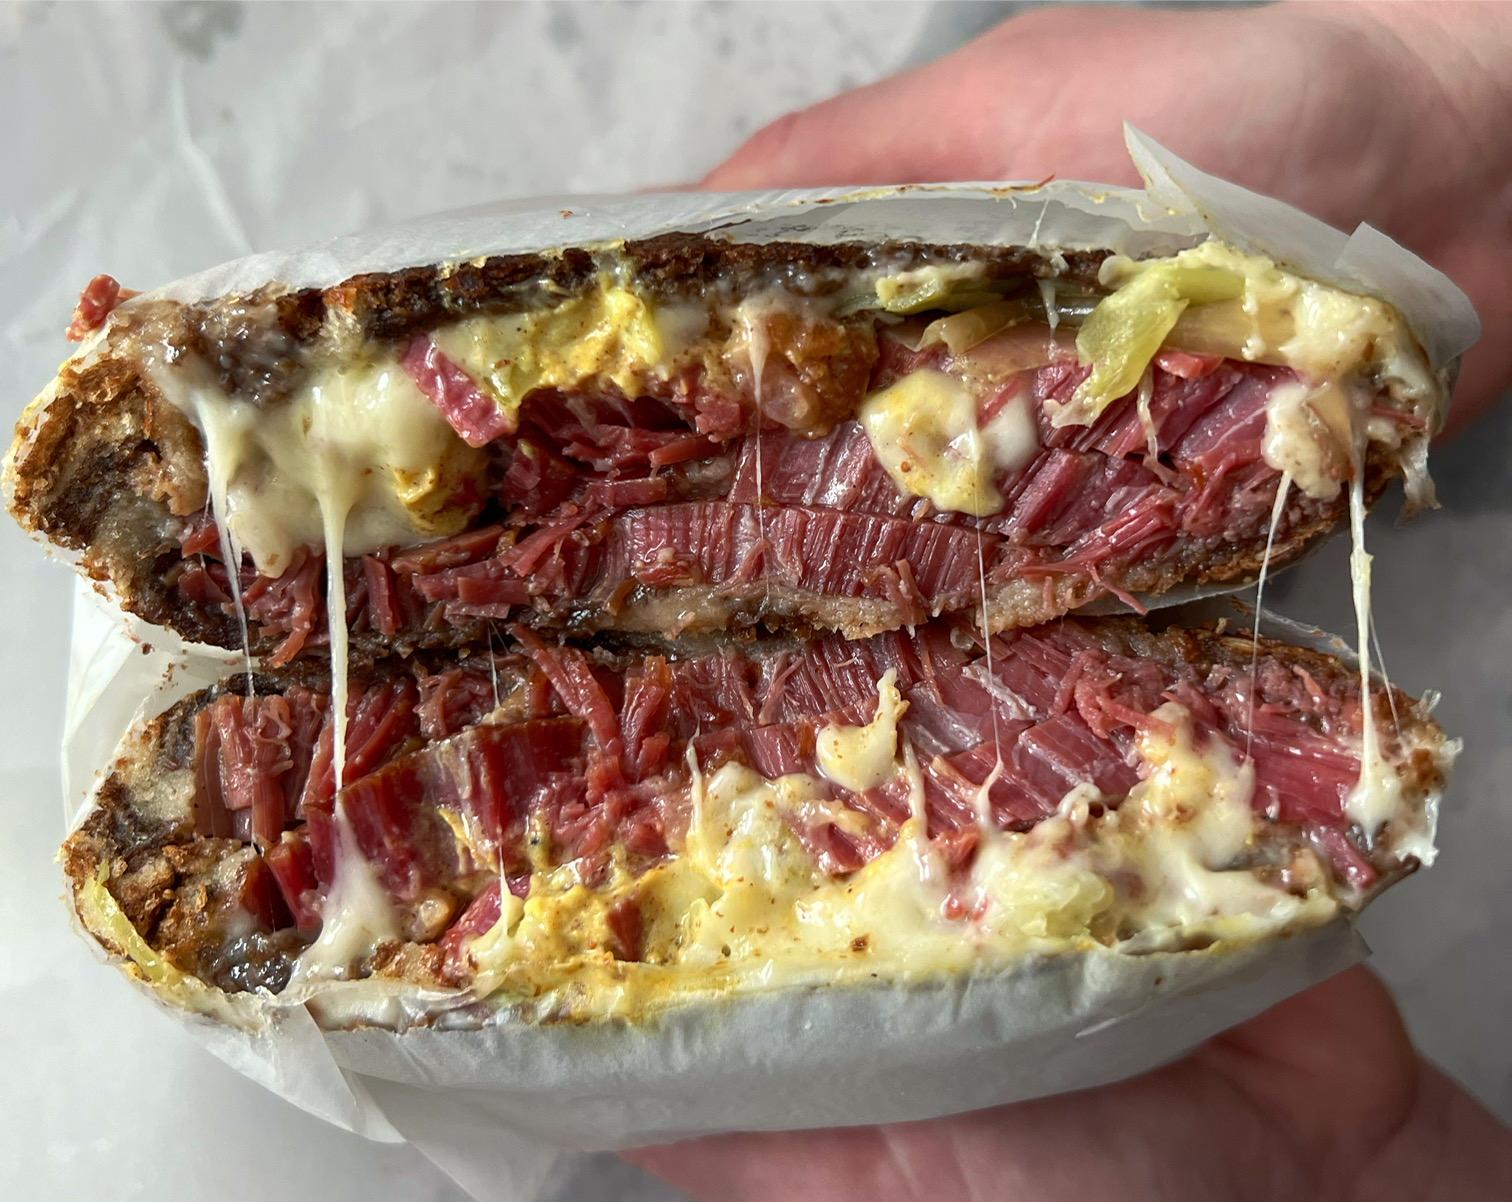 Two white hands hold open a sliced pastrami sandwich from Baldarotta's. The pastrami is red with light yellow baby Swiss cheese threads across and yellow mustard spread. Photo by Alyssa Buckley.